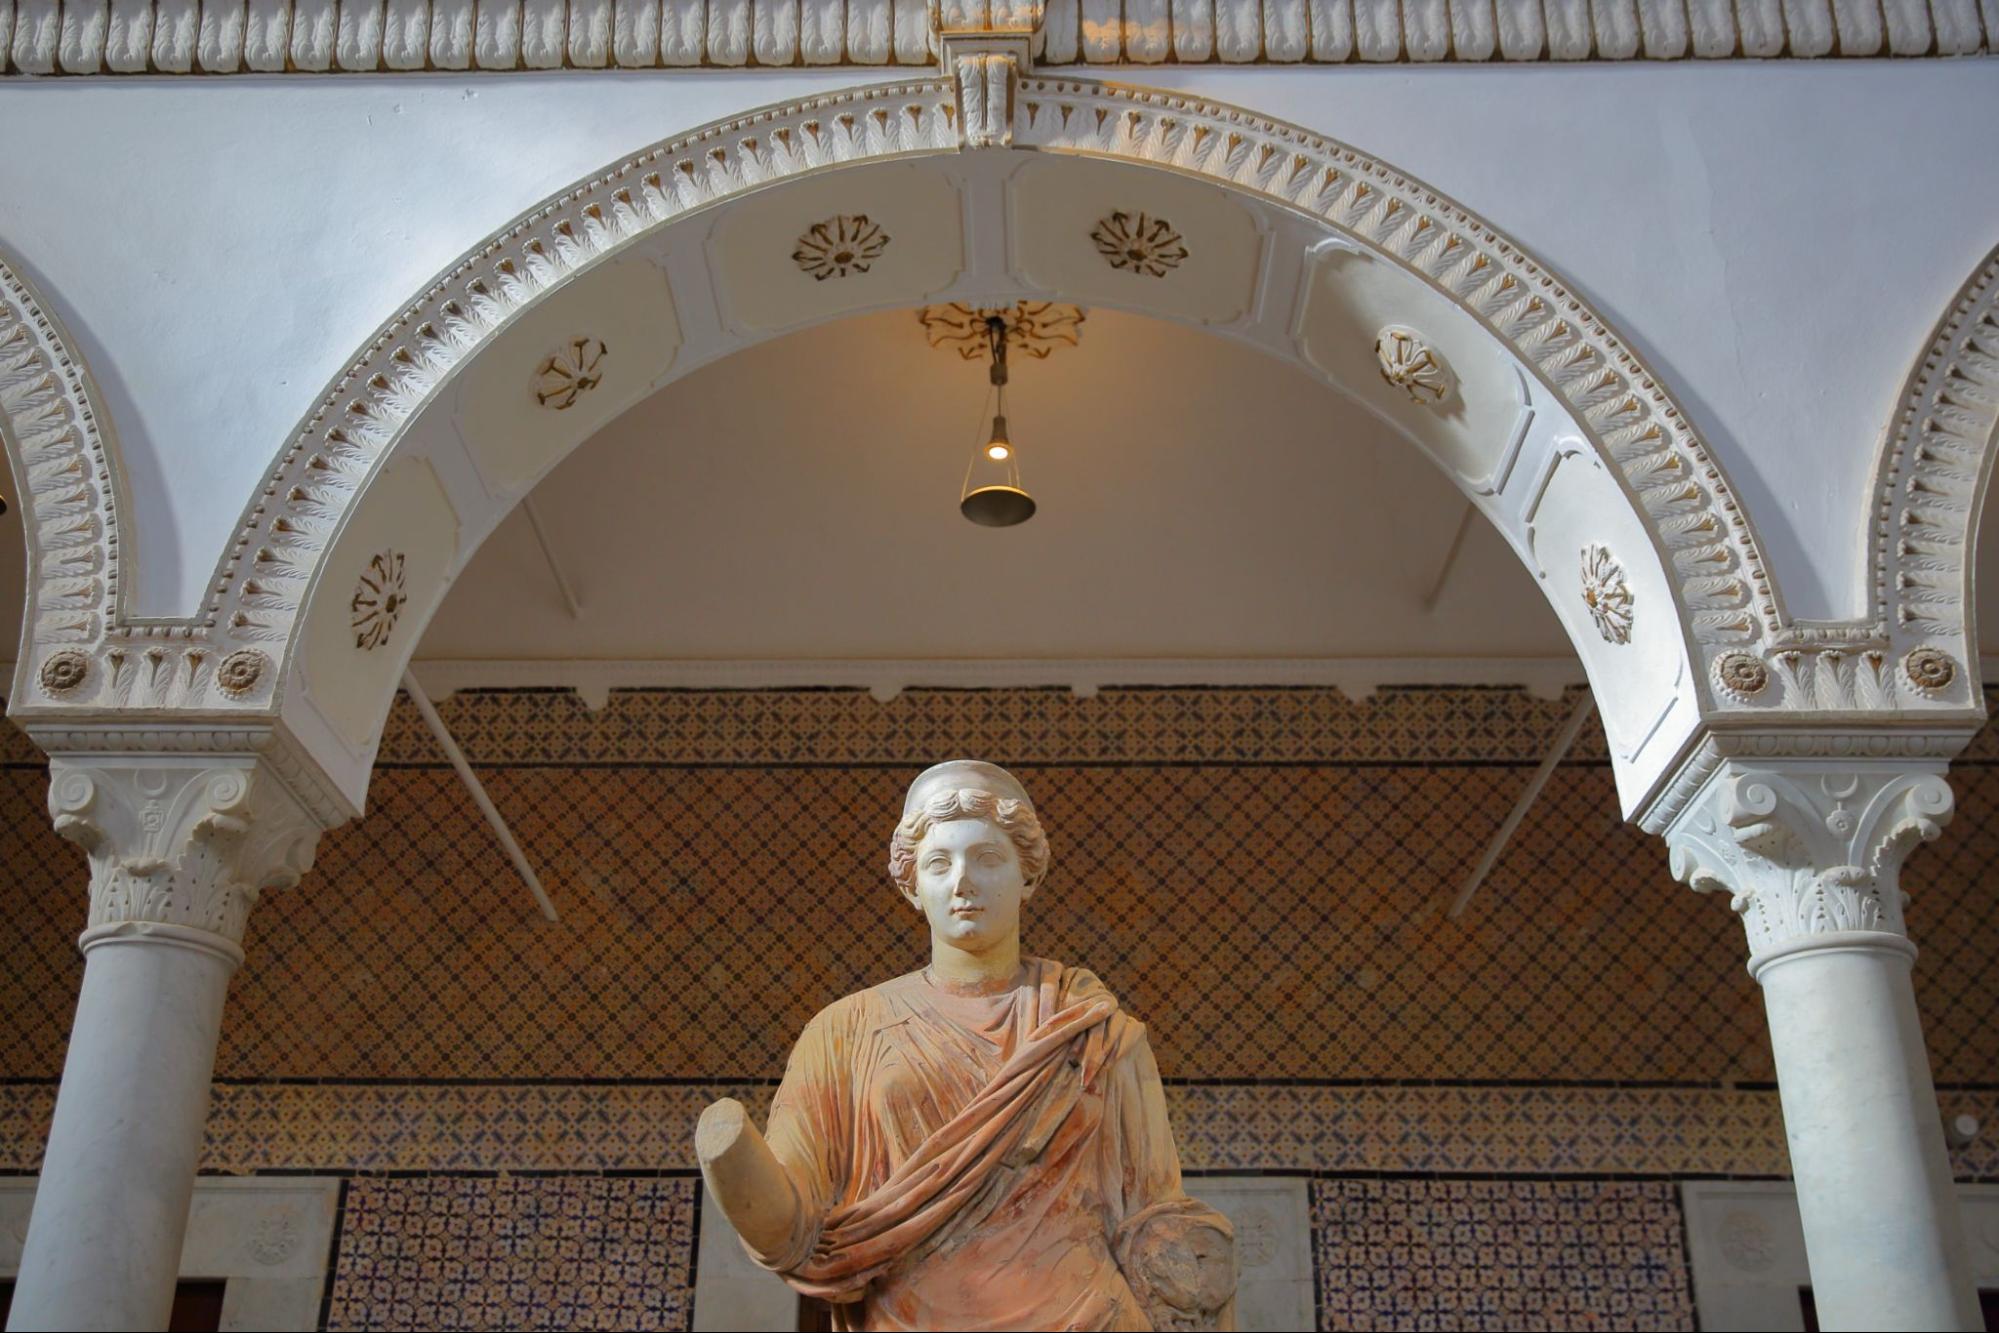 The Carthage room inside the Bardo Museum with close-up on a roman sculpture with arcades and columns